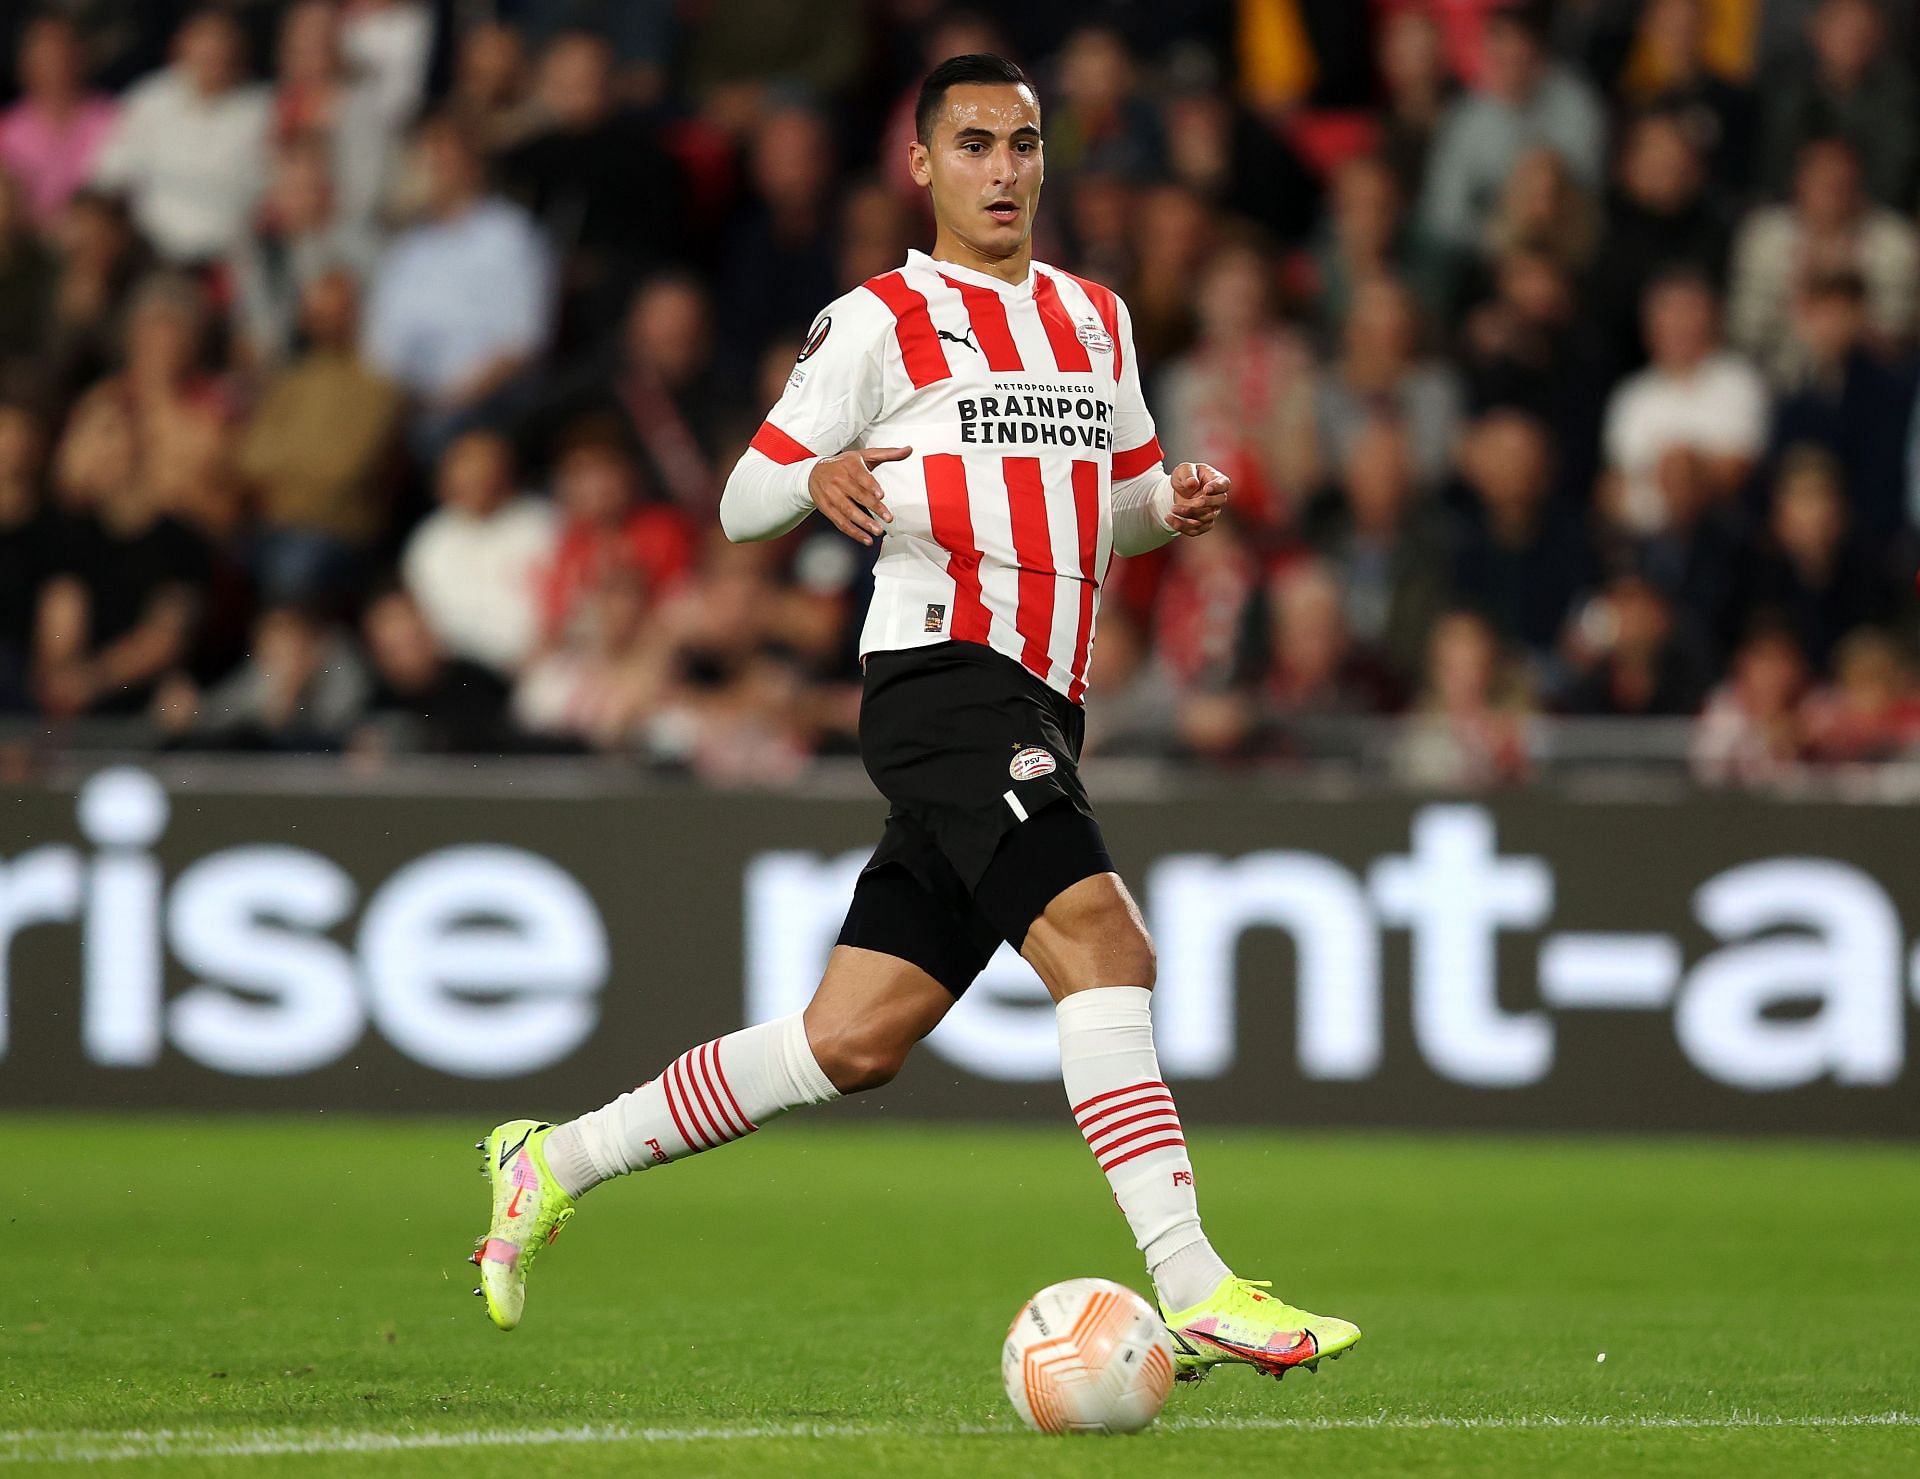 El Ghazi only spent a year with PSV.